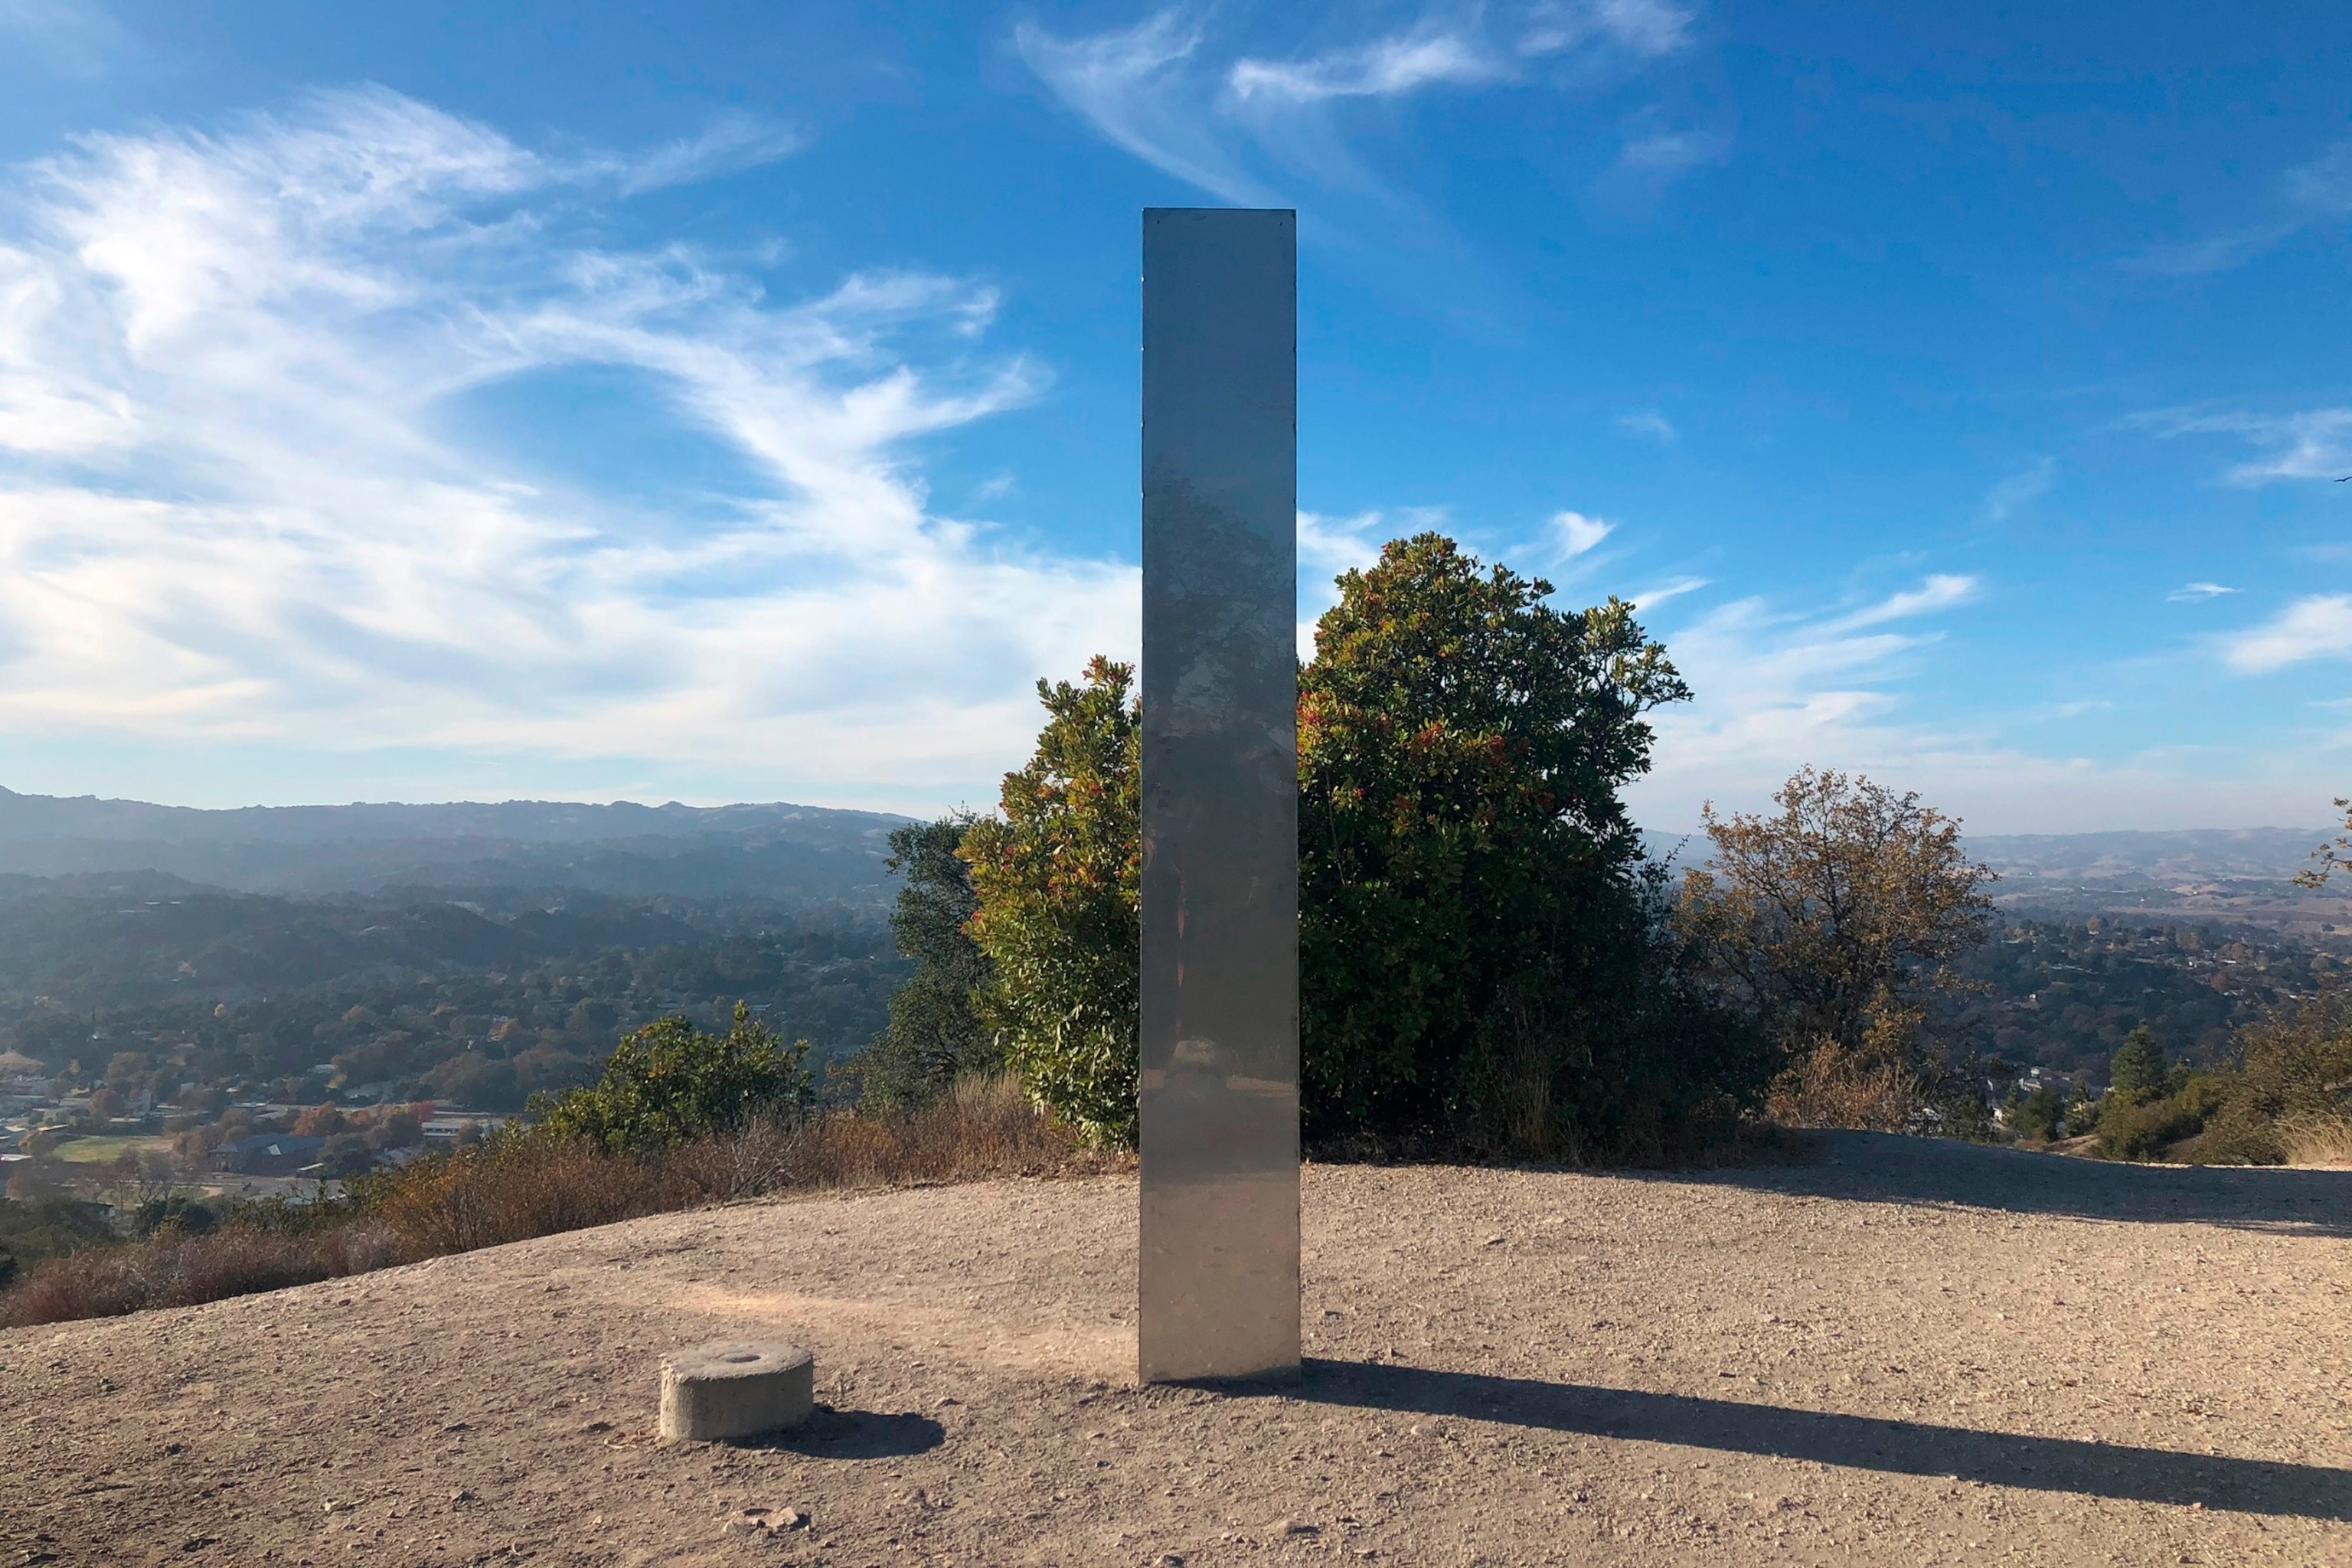 PHOTO: In this Dec. 2, 2020, file photo, a monolith stands on a Stadium Park hillside in Atascadero, Calif.